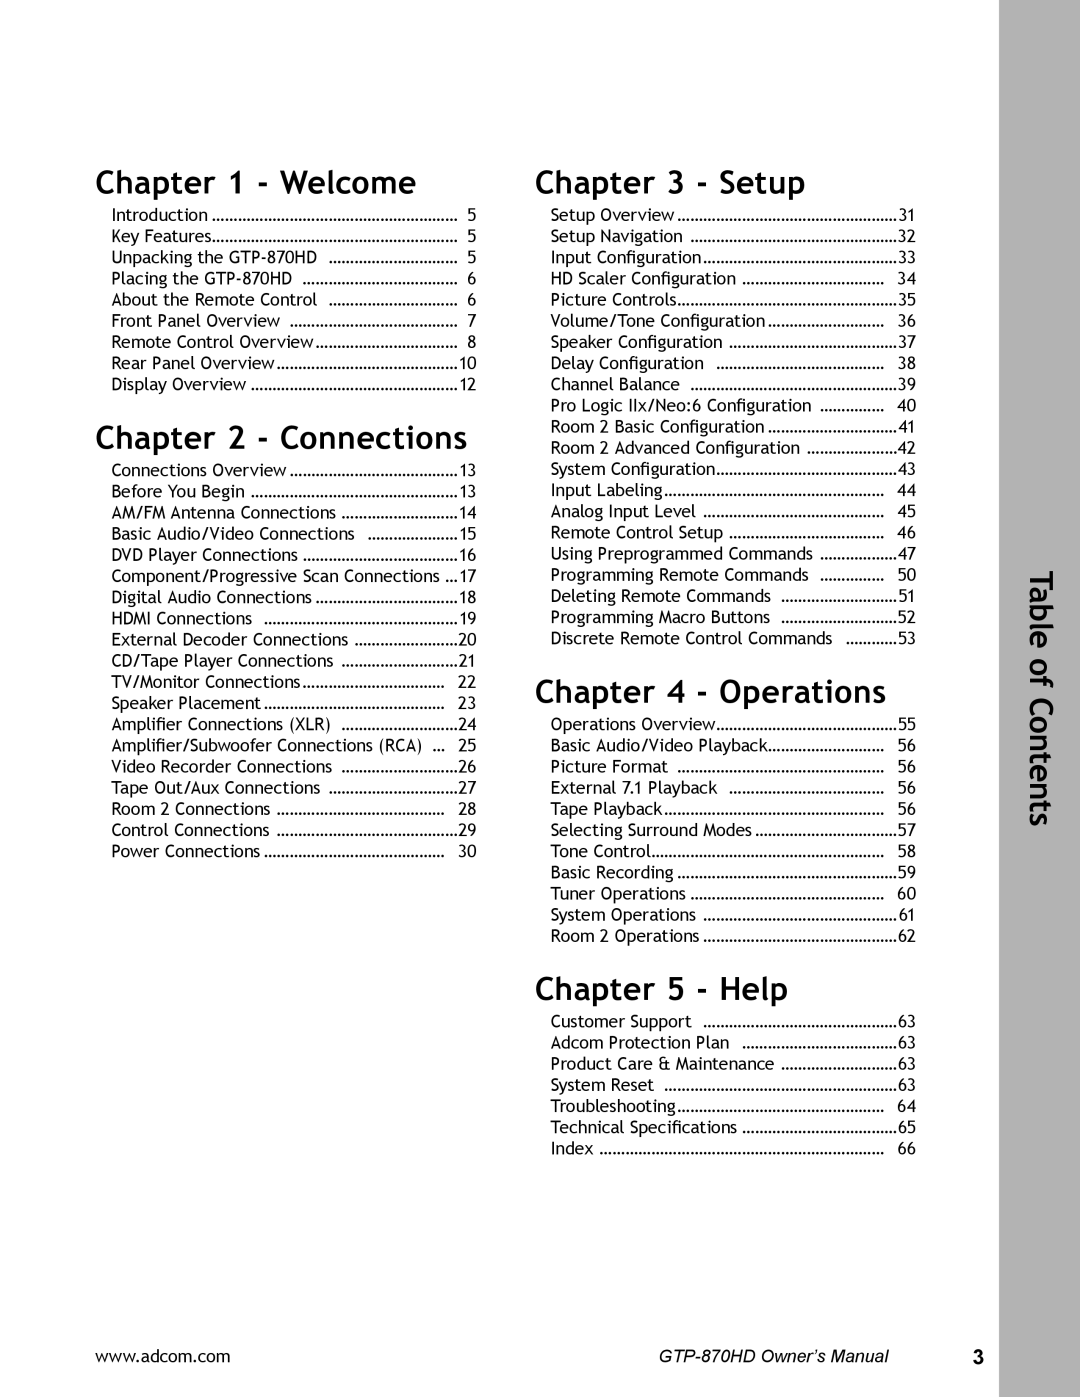 Adcom user manual Welcome, Connections, Setup, Operations, Help, Table of Contents, GTP-870HDOwner’s Manual 